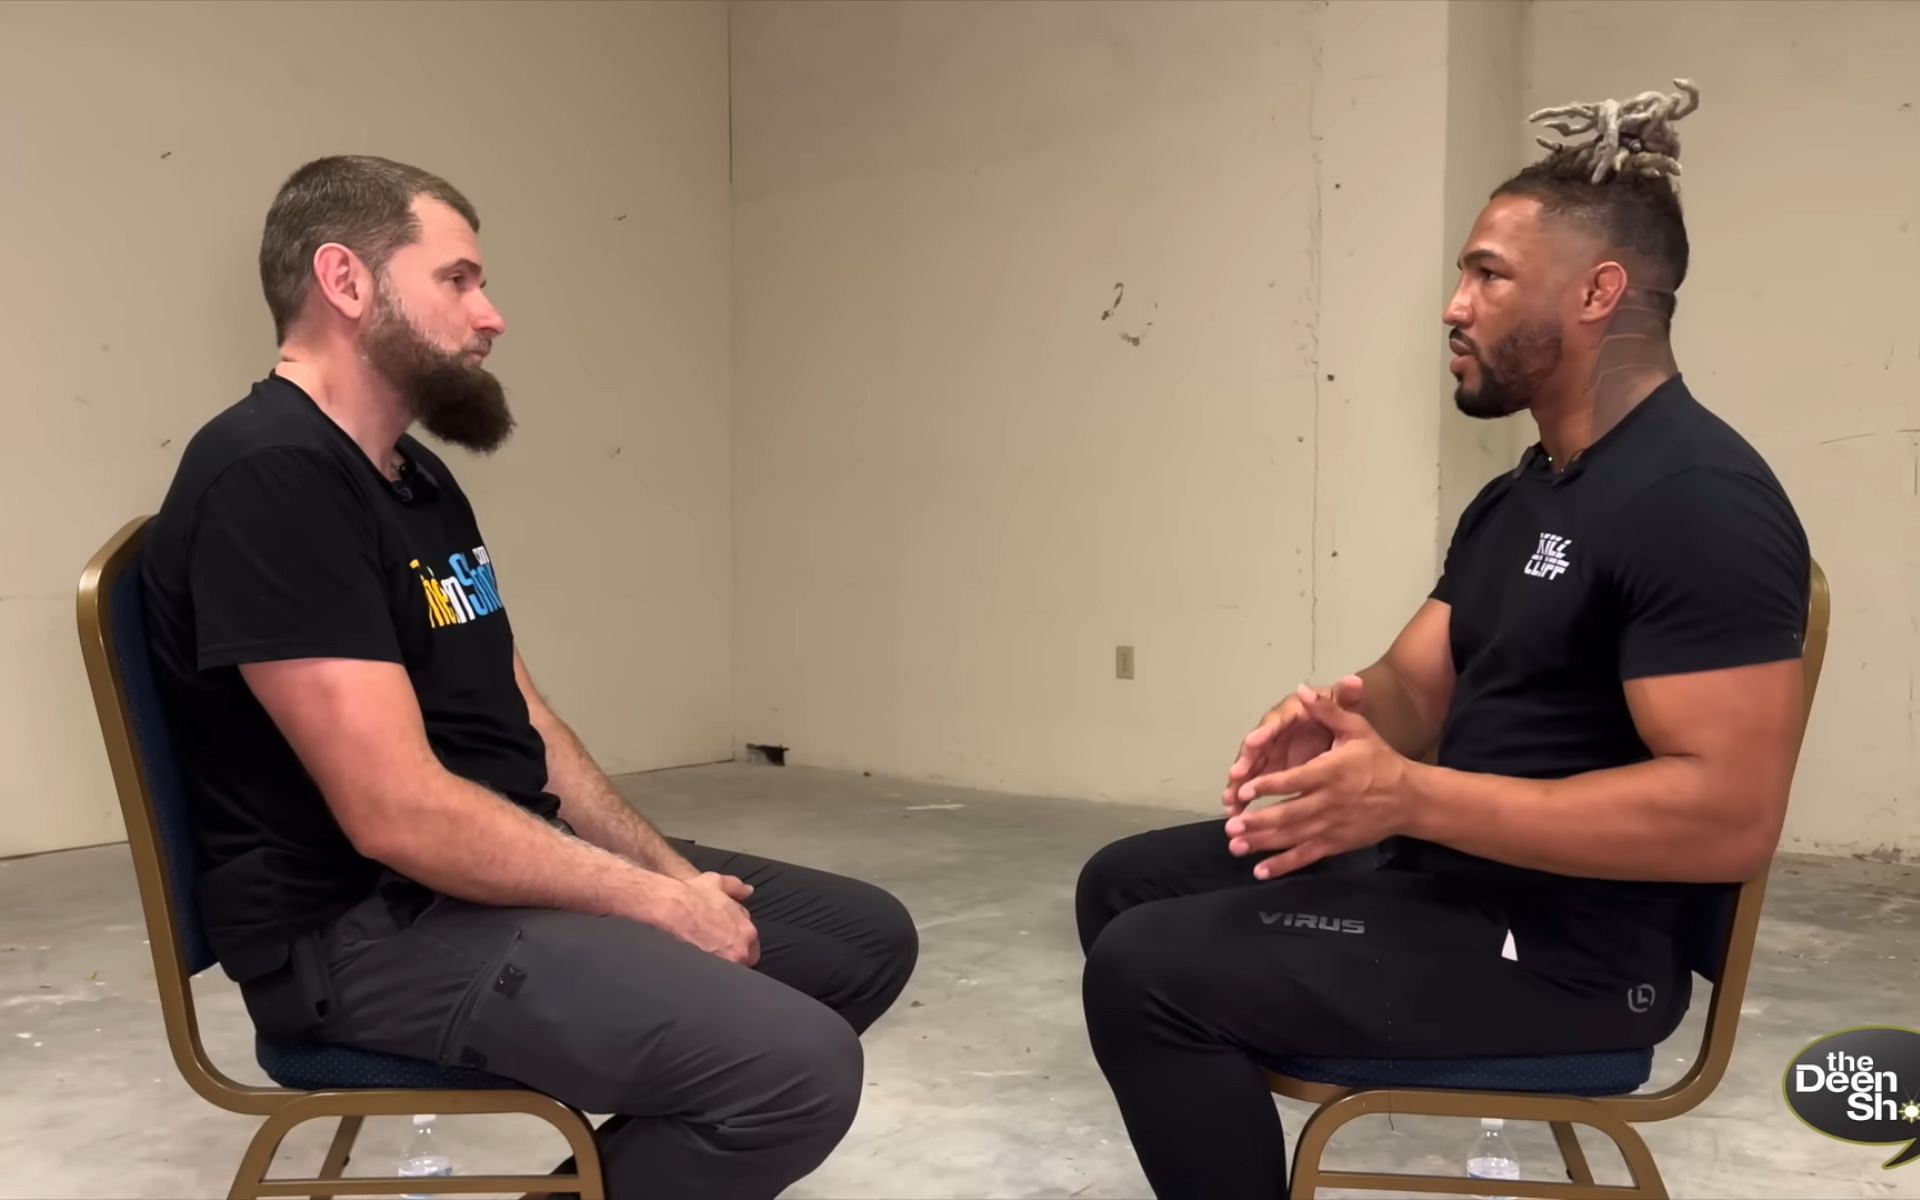 Kevin Lee explains his decision to turn to Islam to help him during a dark spiral